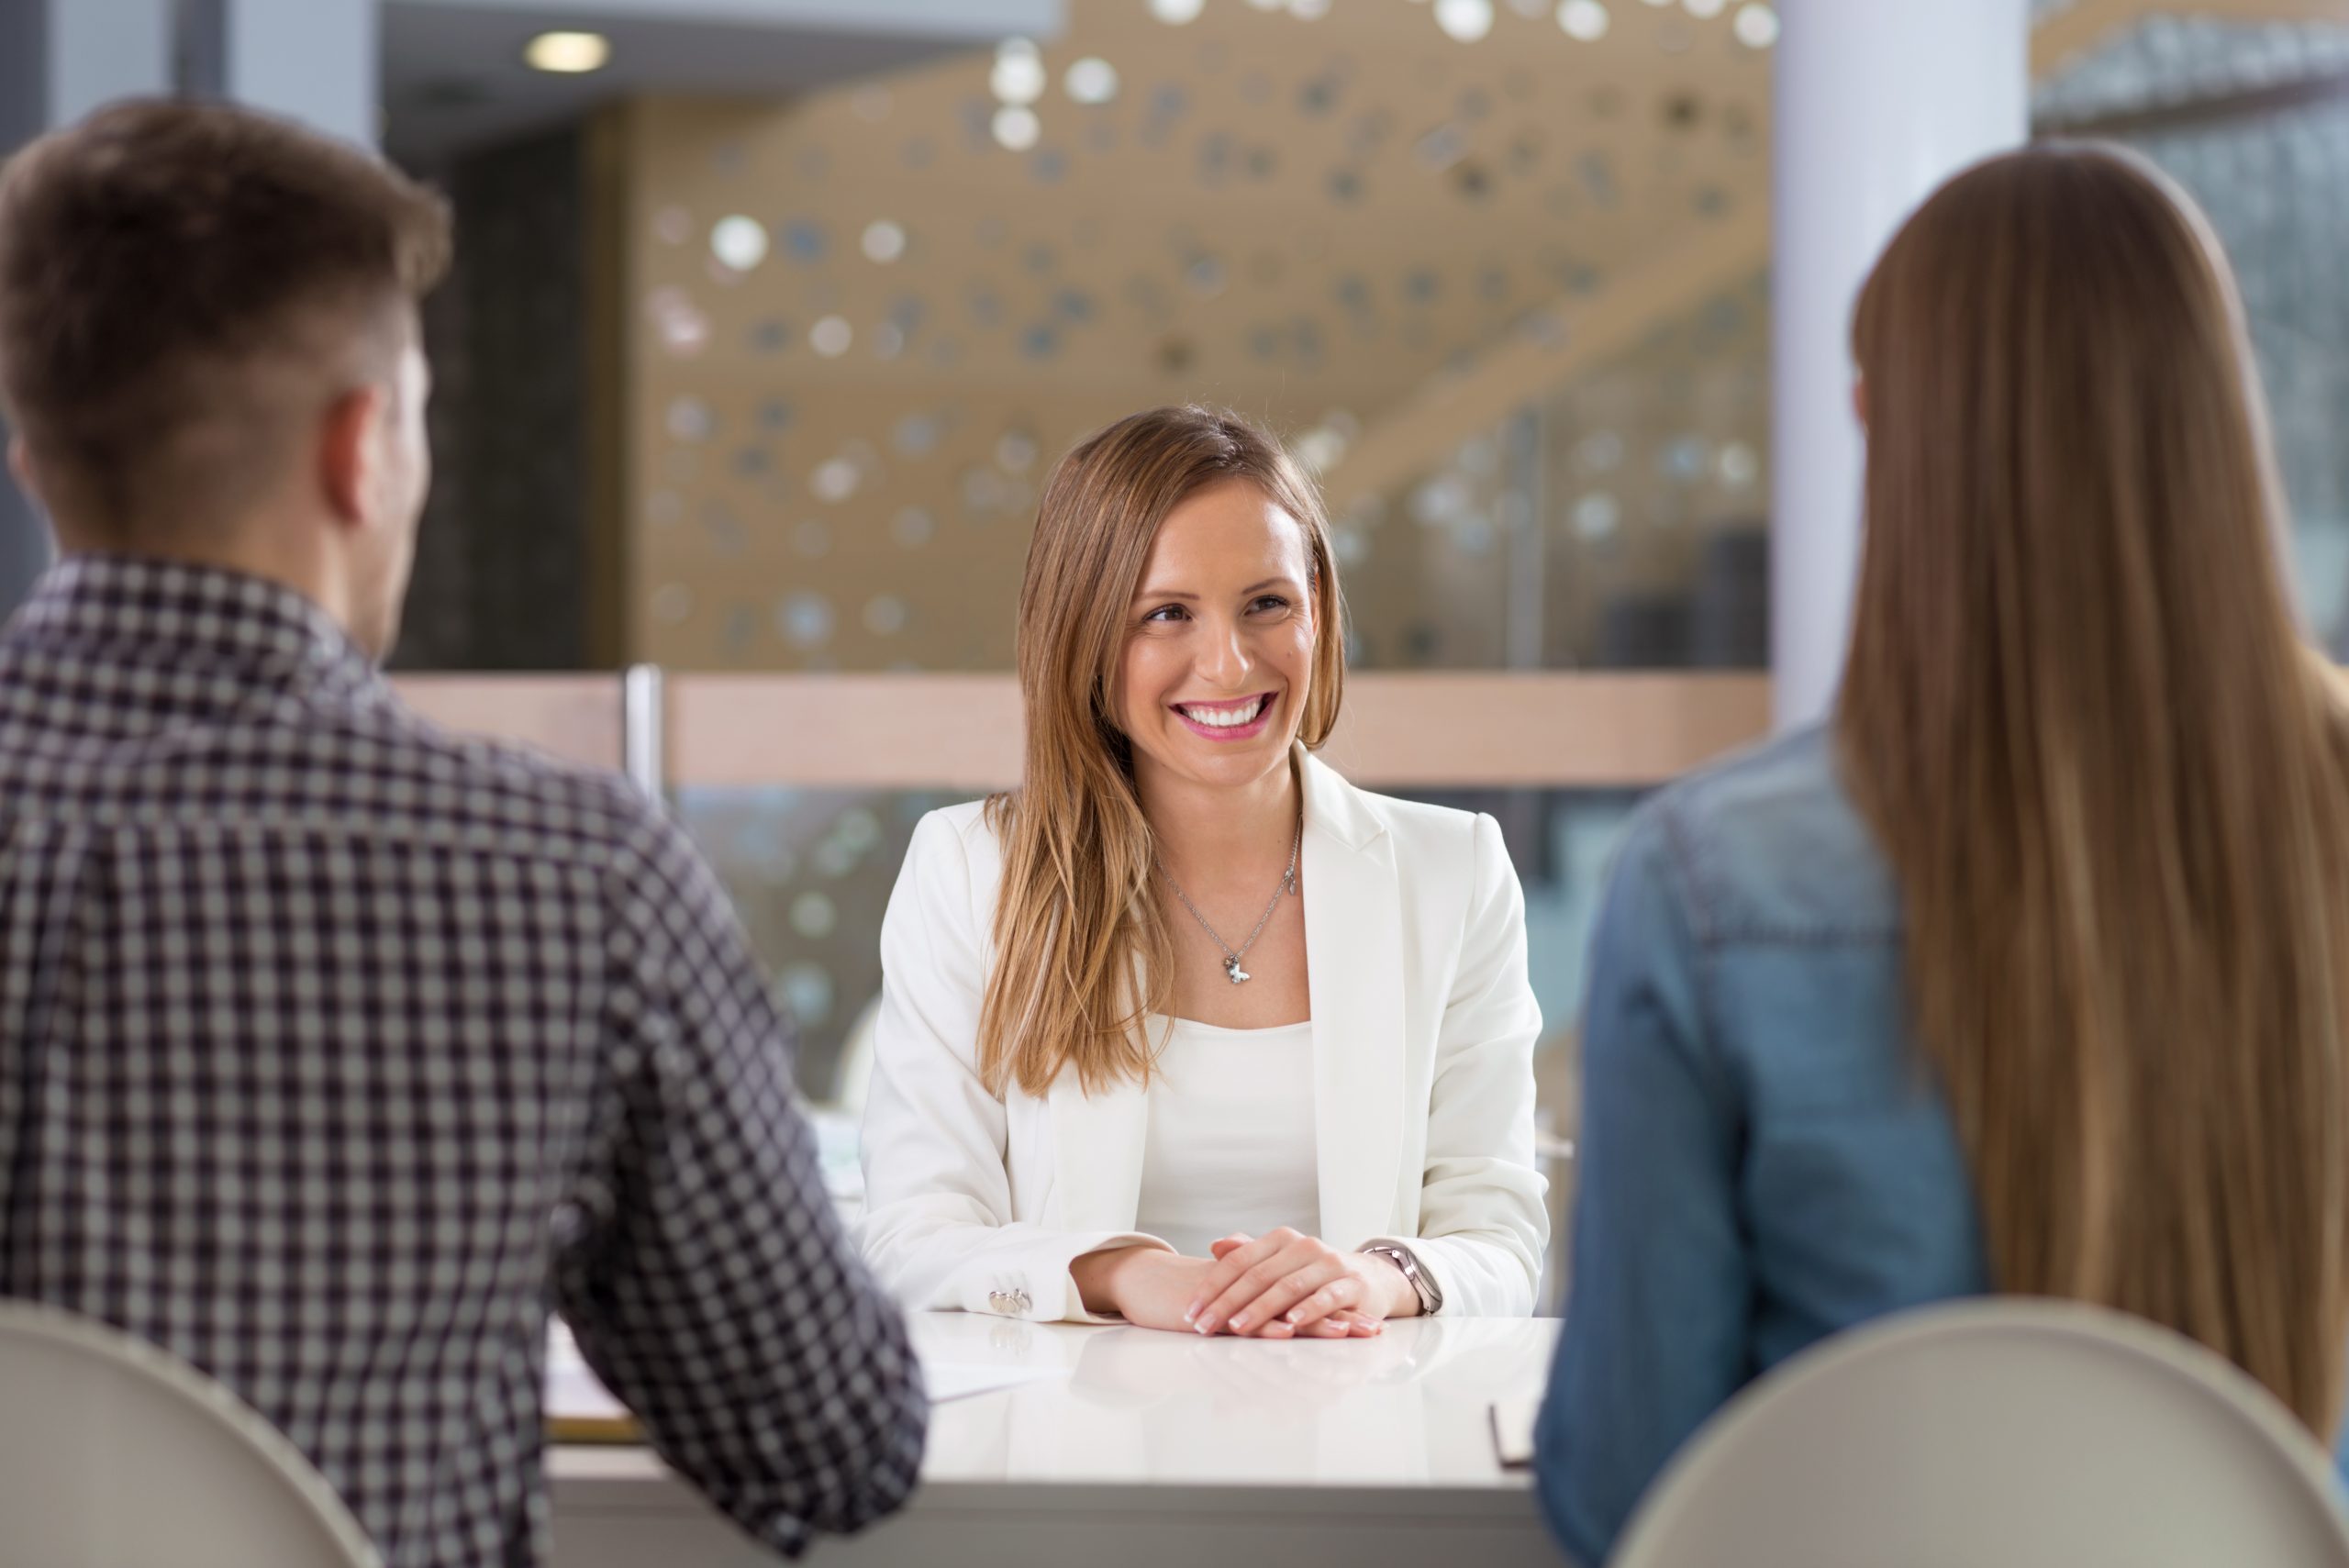 interview tips that really matter